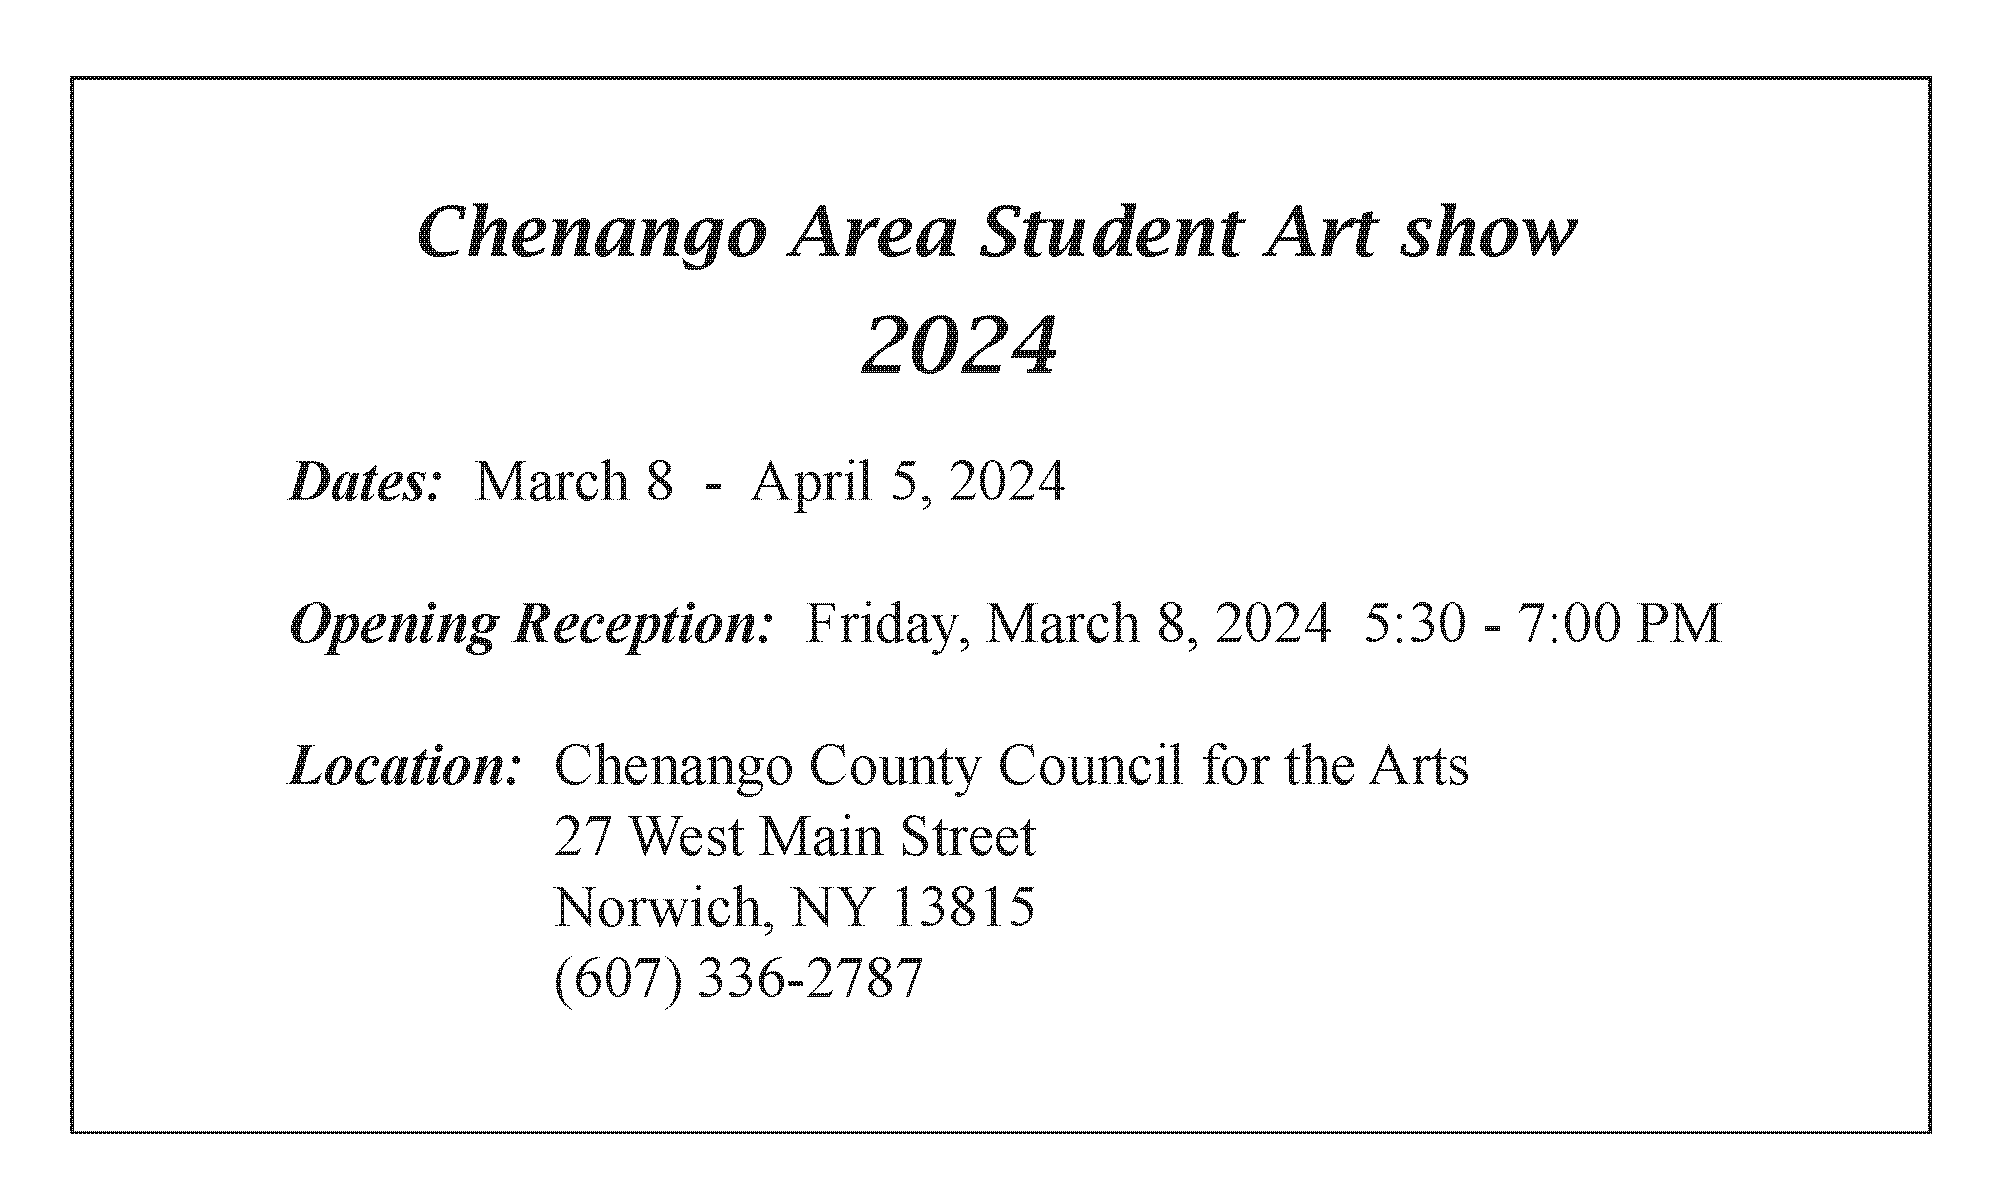 Chenango Area Student Art Show 2024 - Dates - March 8 - April 5 2024 Opening Reception: Friday, March 8, 2024 5:30 - 7:00 pm Location: Chenango County Council for the Arts 27 West Main Street Norwich, NY, 13815 (607) 336 2787